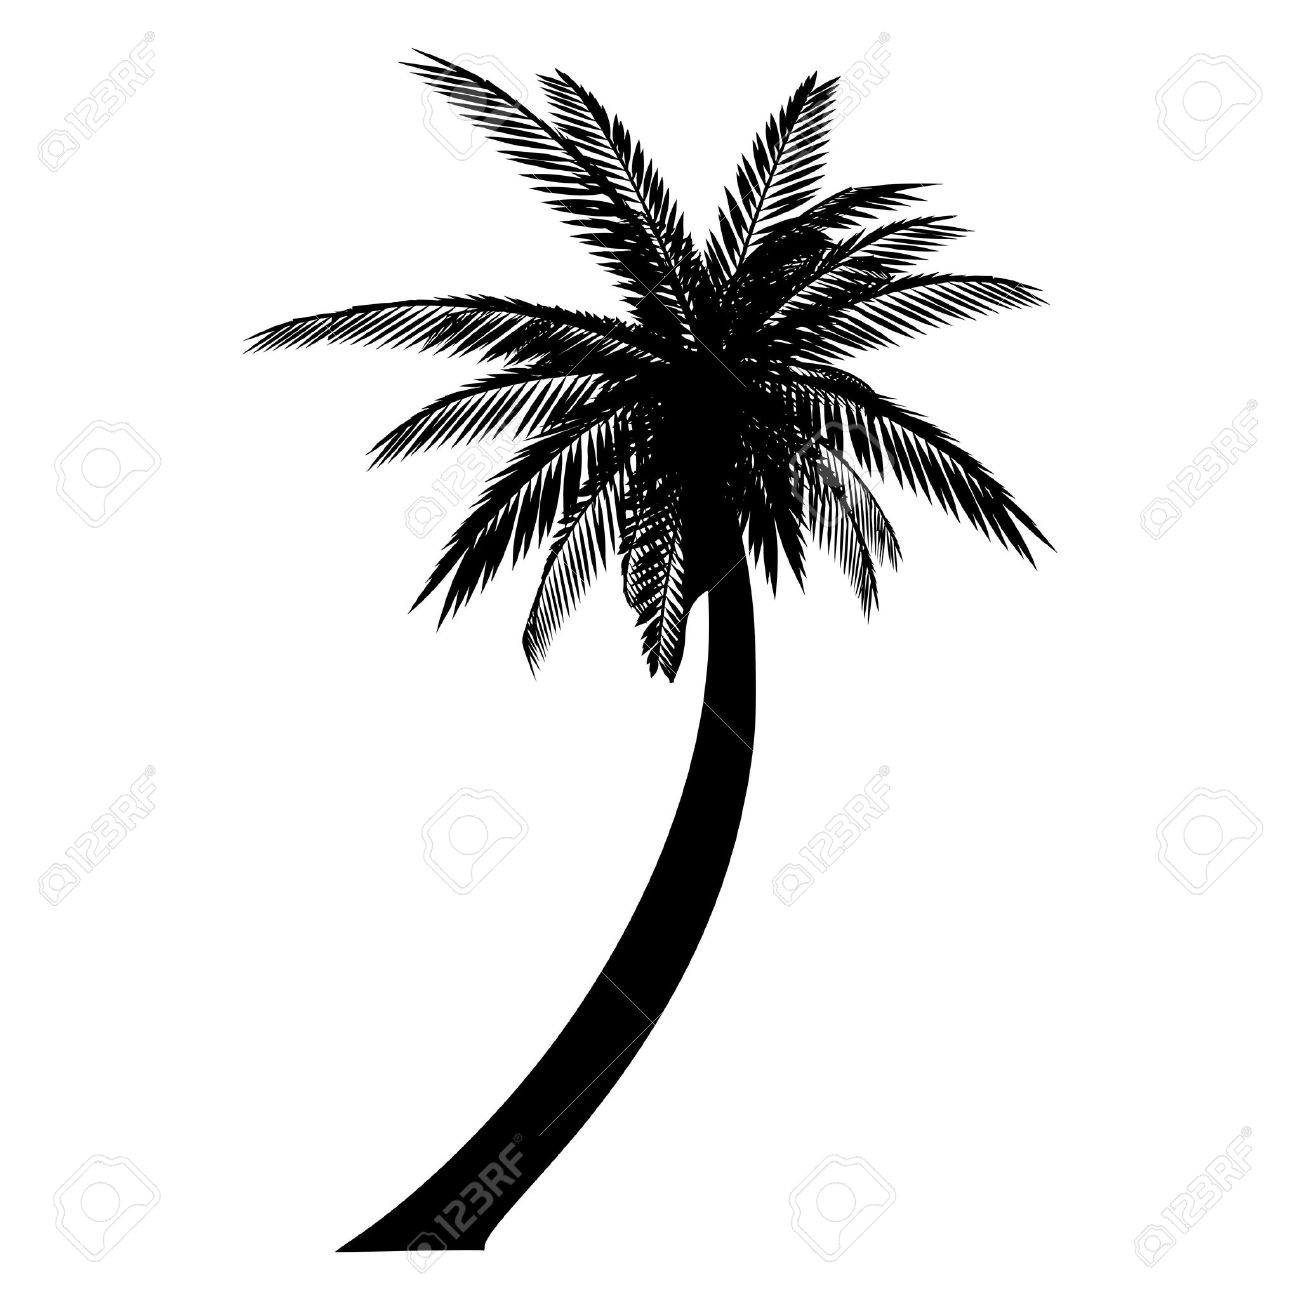 palm tree clipart no background - photo #29